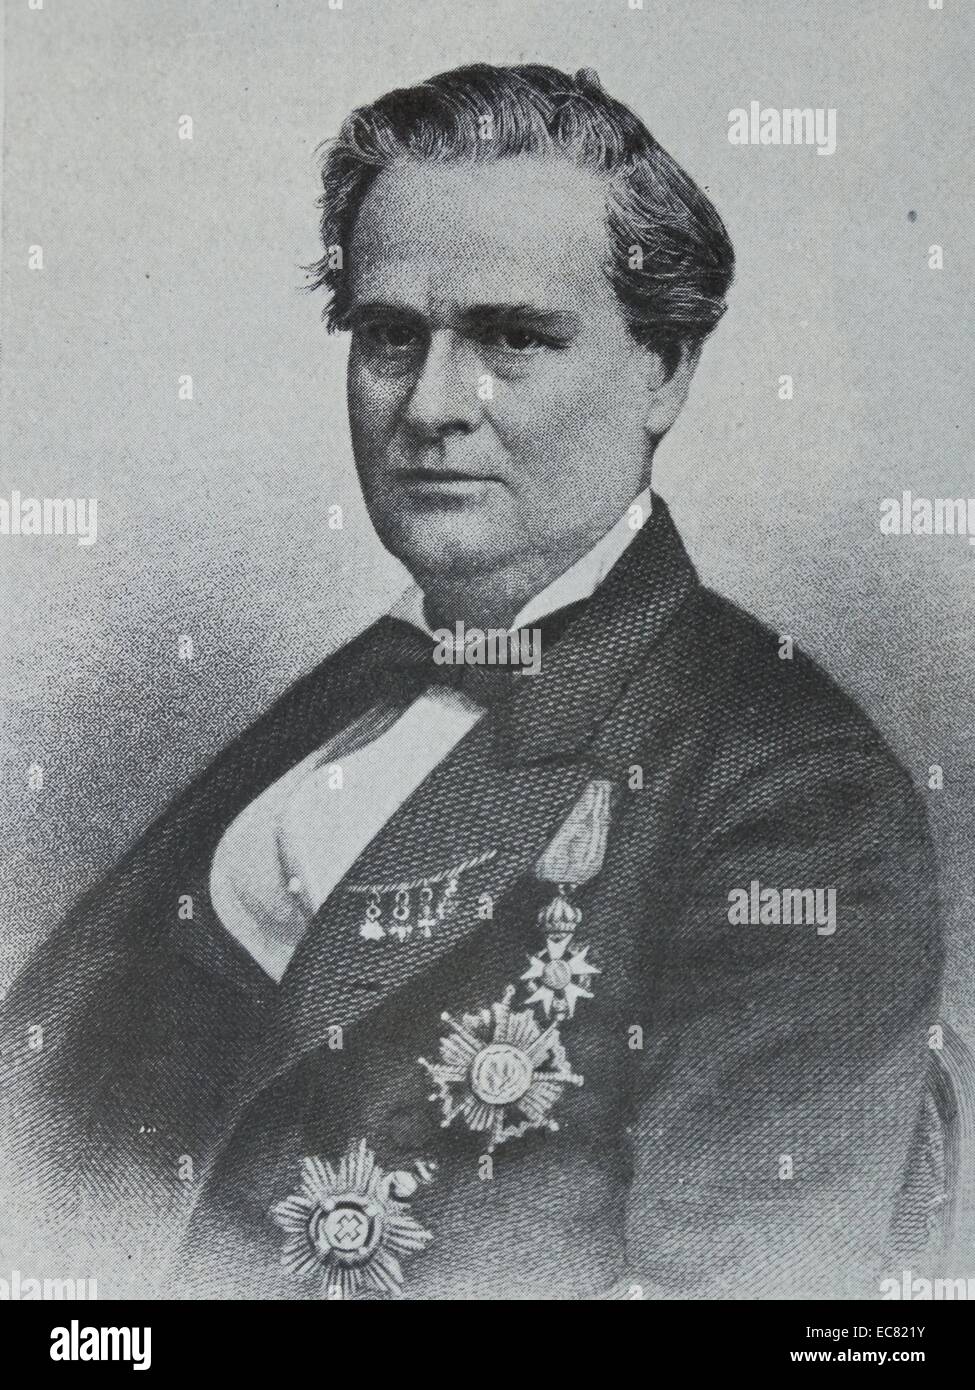 J. Marion Sims, born James Marion Sims (January 25, 1813 – November 13, 1883) was a physician and a pioneer in the field of surgery, considered by some as the father of modern gynecology. Stock Photo